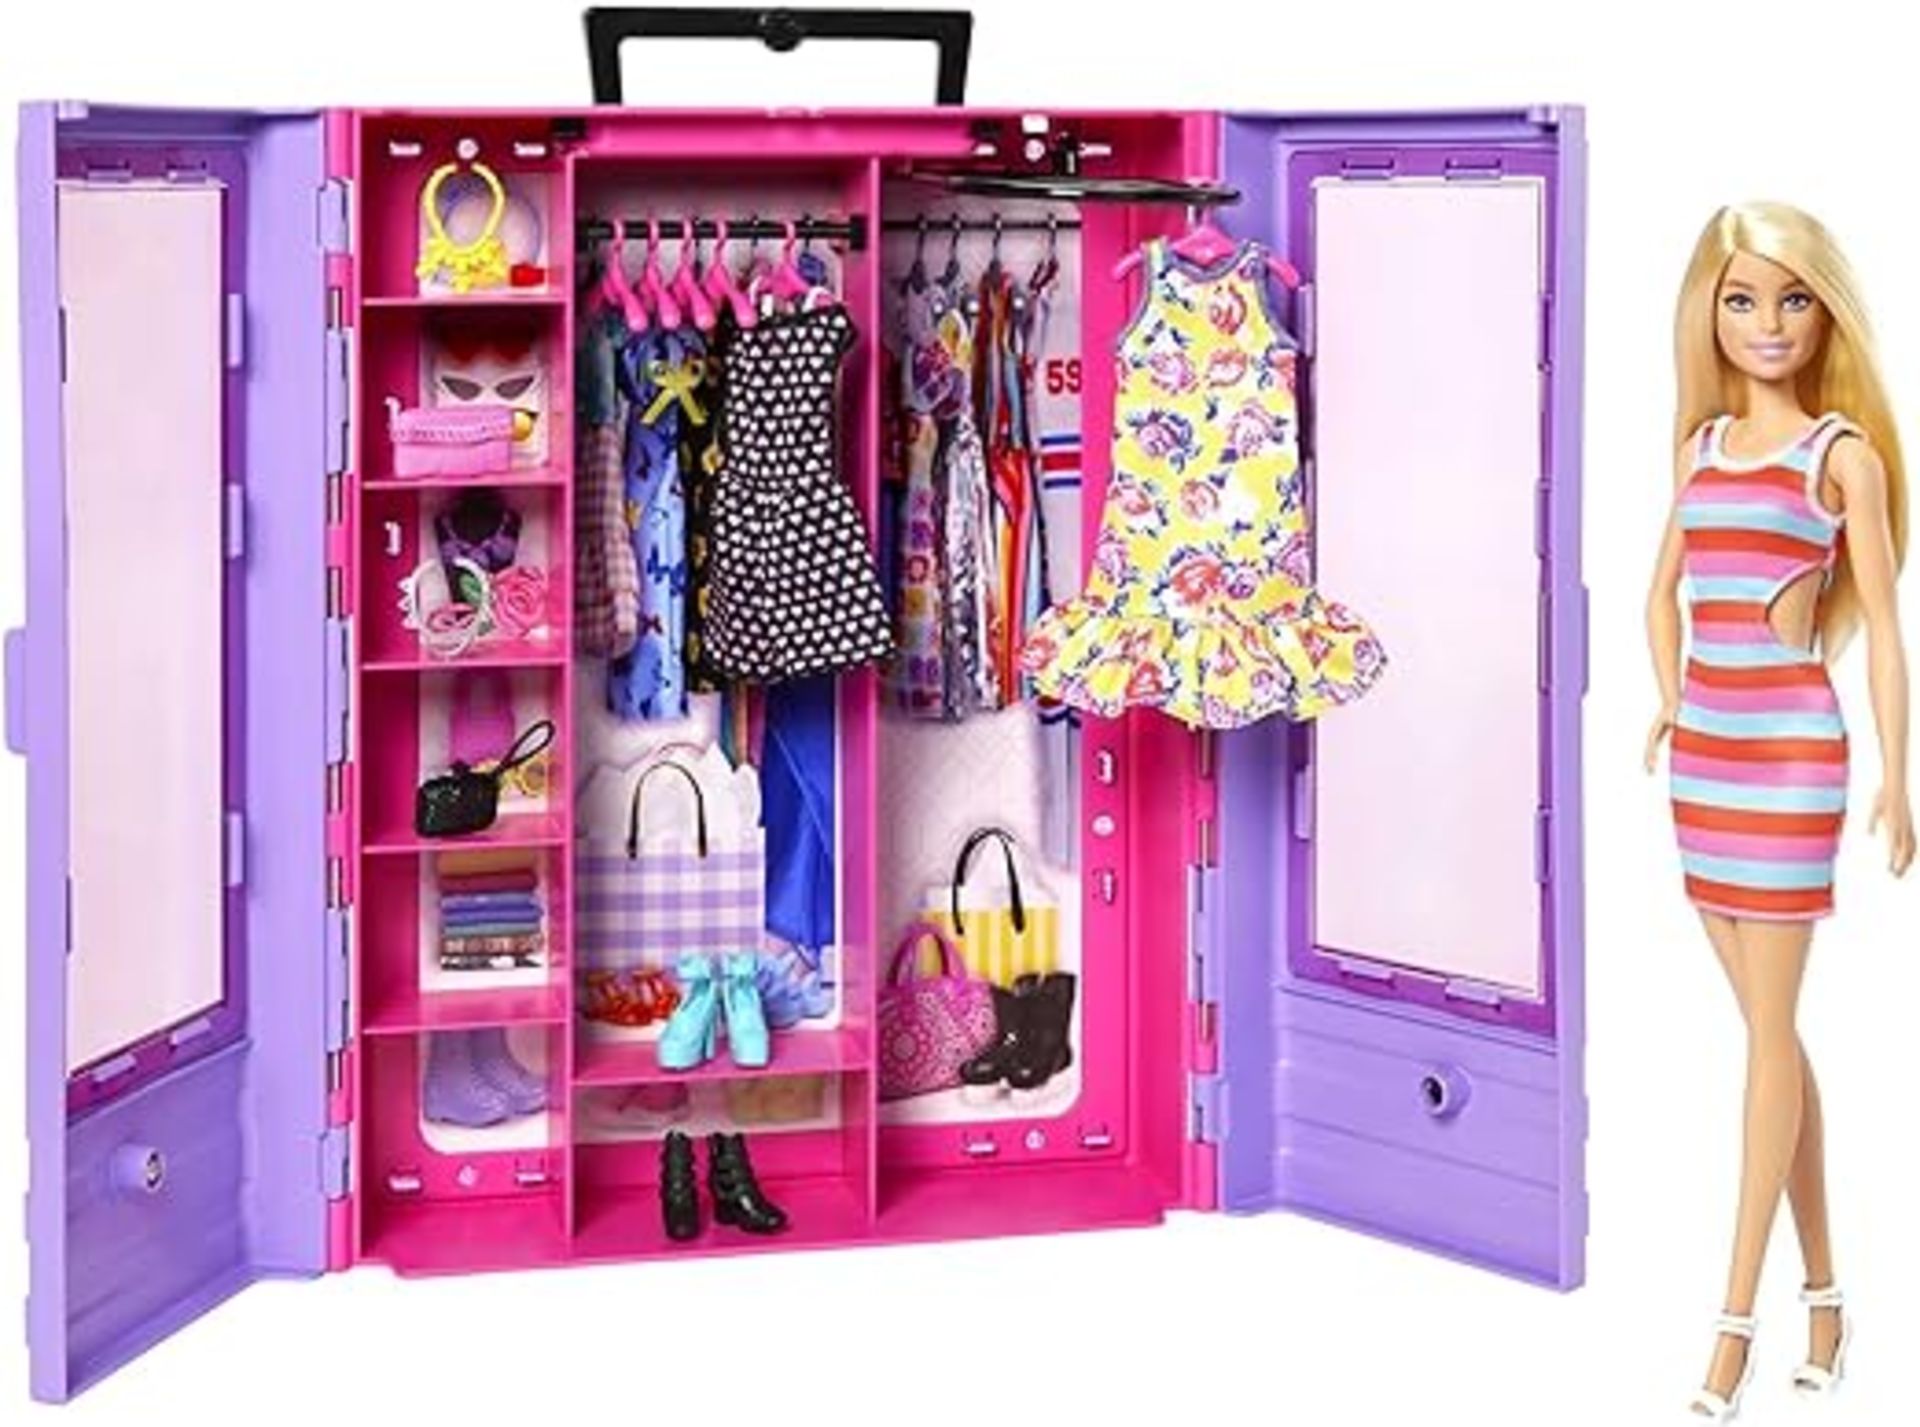 Barbie Fashionistas Ultimate Closet and Doll, One Blonde Barbie Doll with 3 Barbie Outfits, 6 Barbie